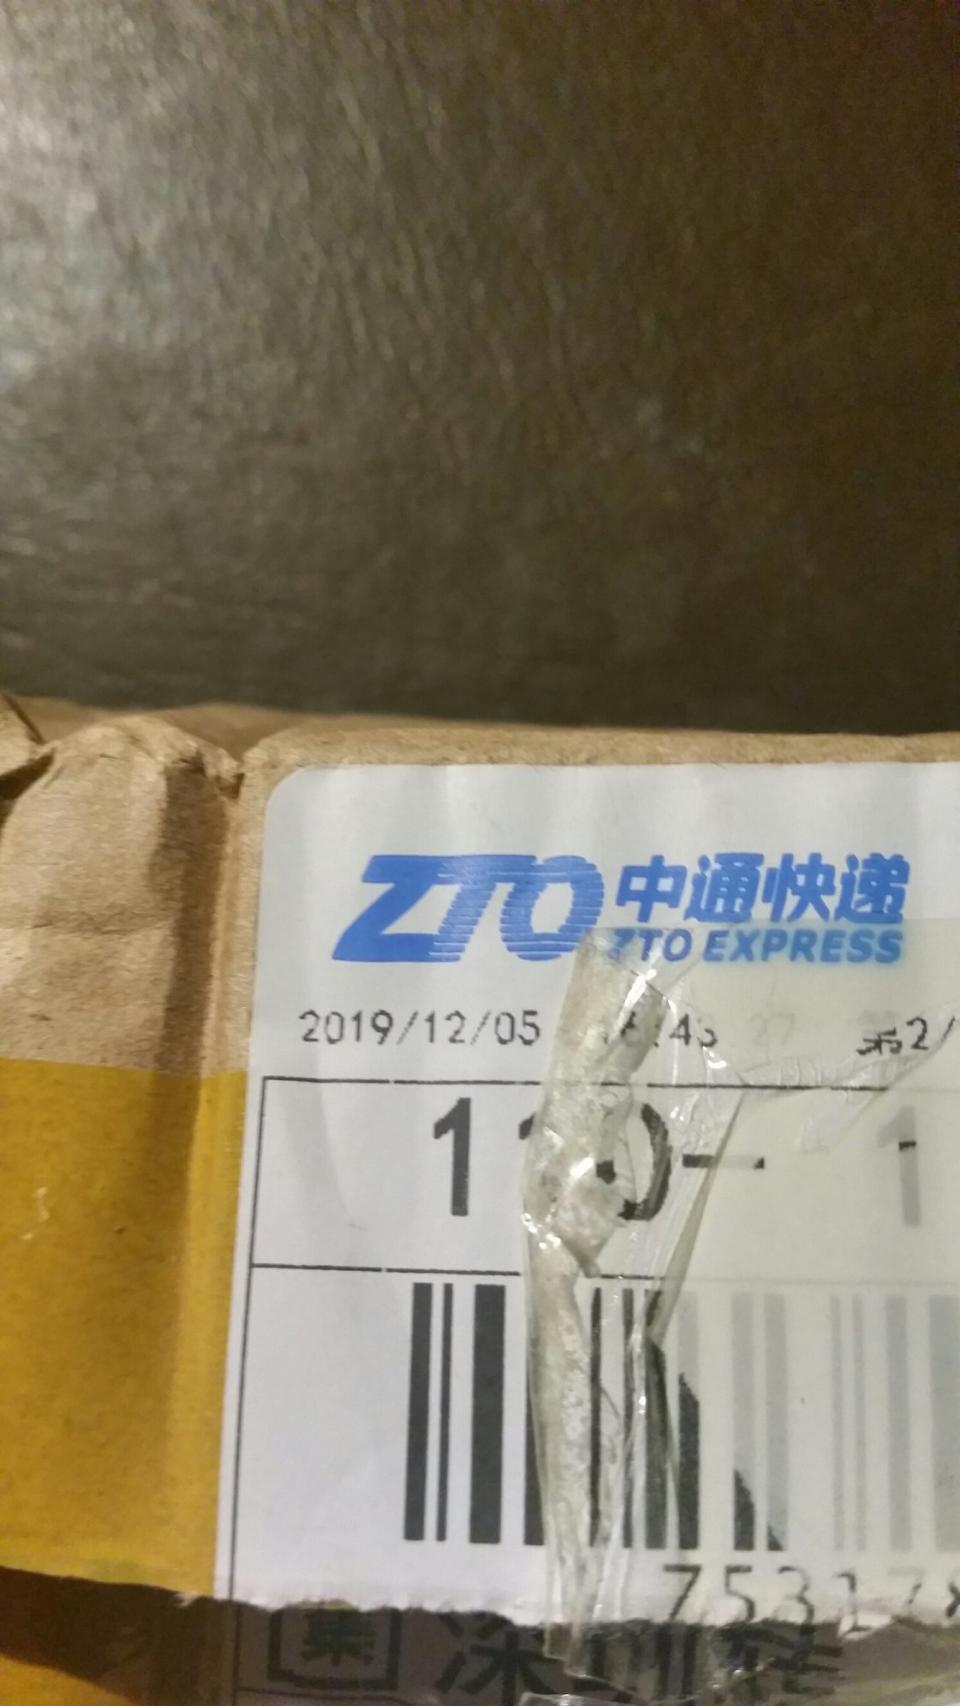 The package states it was sent on December 5 last year. Source: Facebook